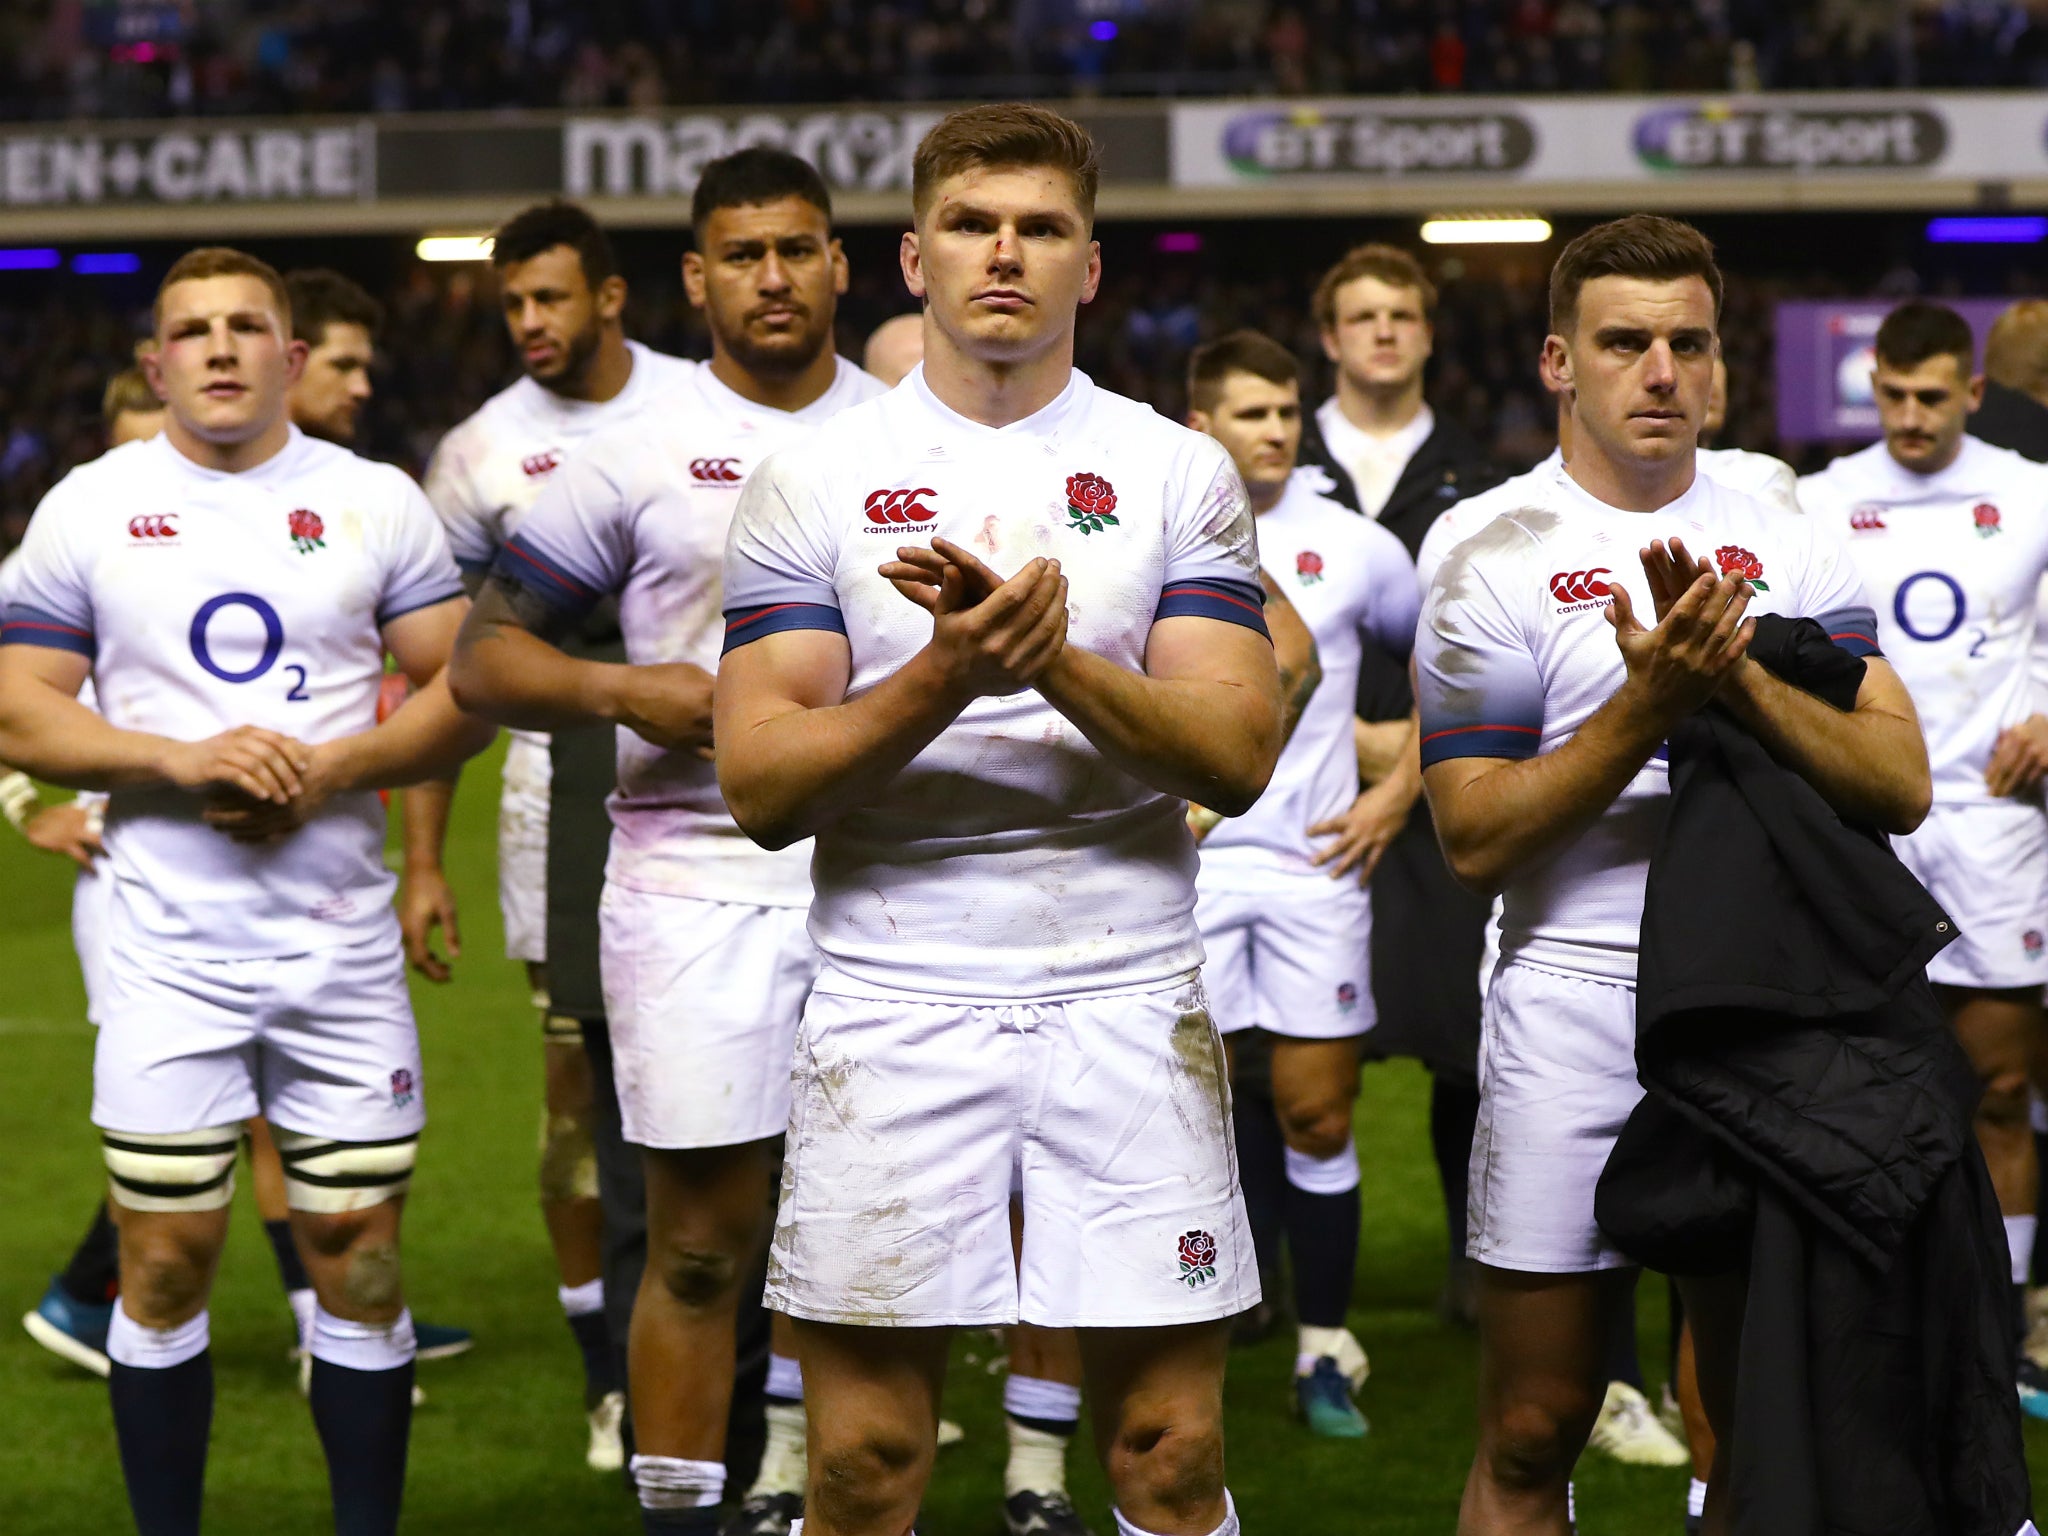 Owen Farrell will lead England in the must-win game